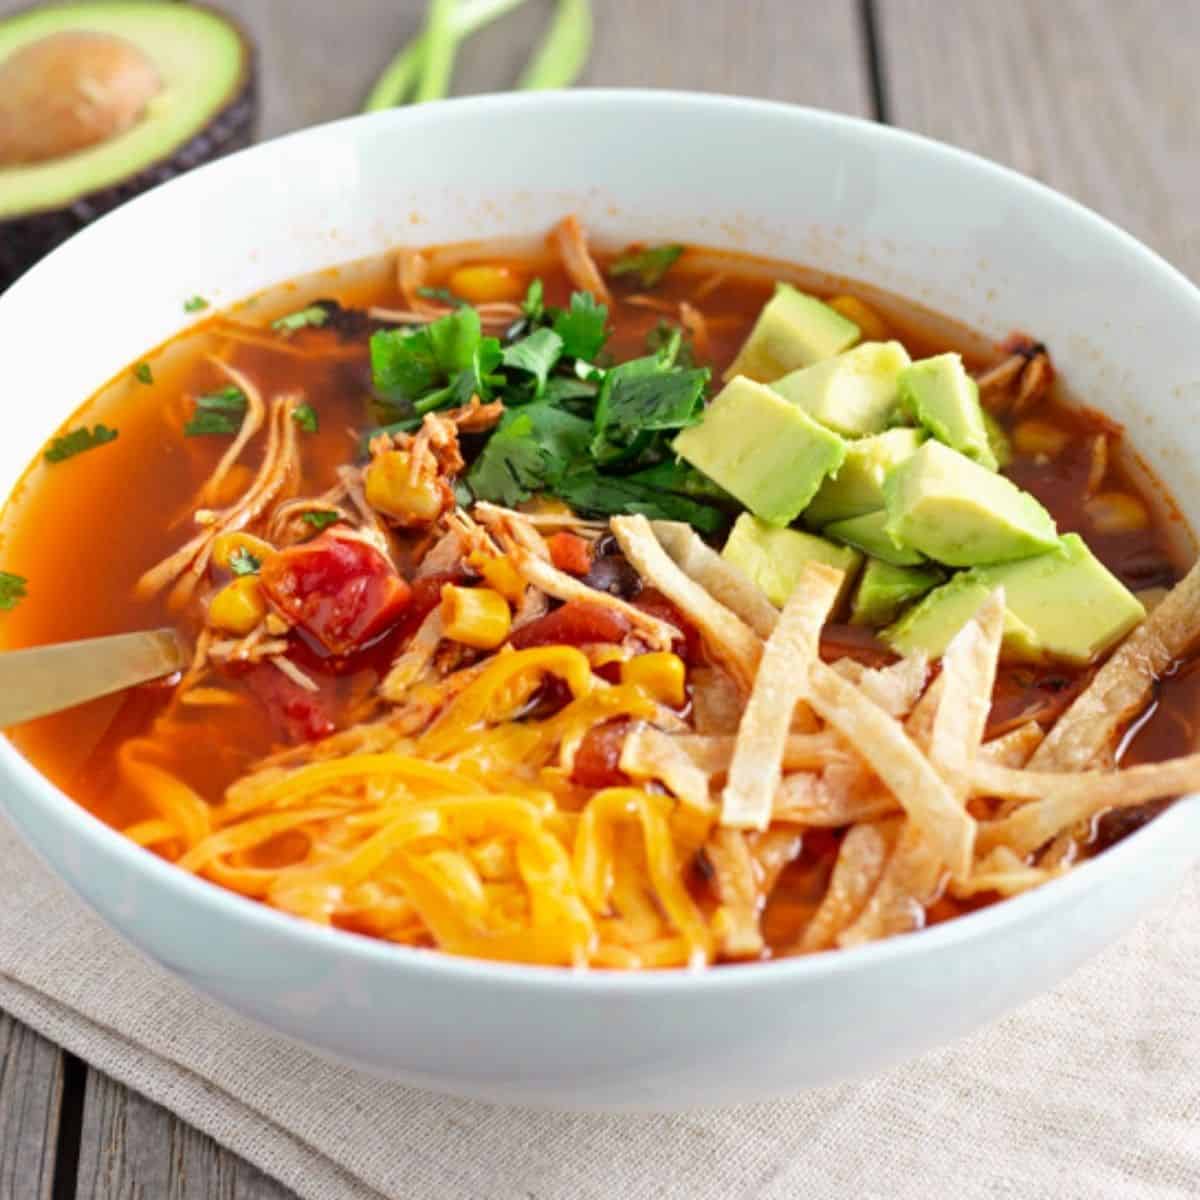 Chicken Tortilla Soup- Instant Pot or Slow Cooker